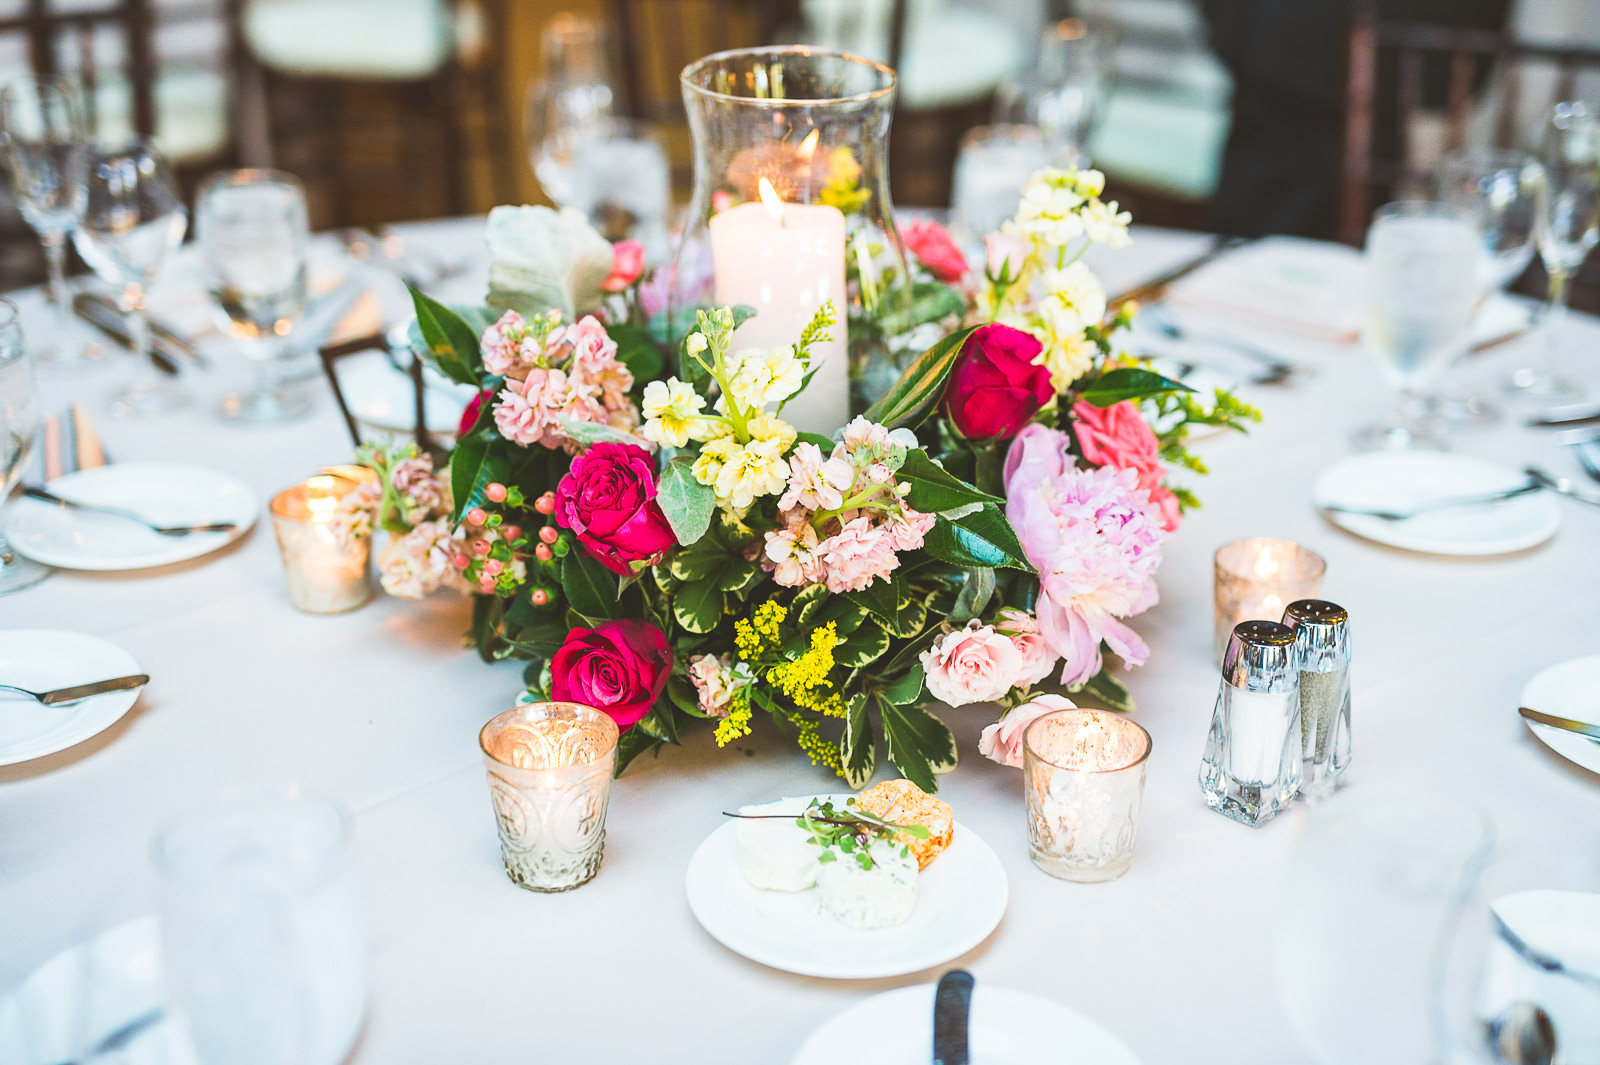 51 flowers at reception - Natalie + Alan // Chicago Wedding Photographer at Cafe Brauer